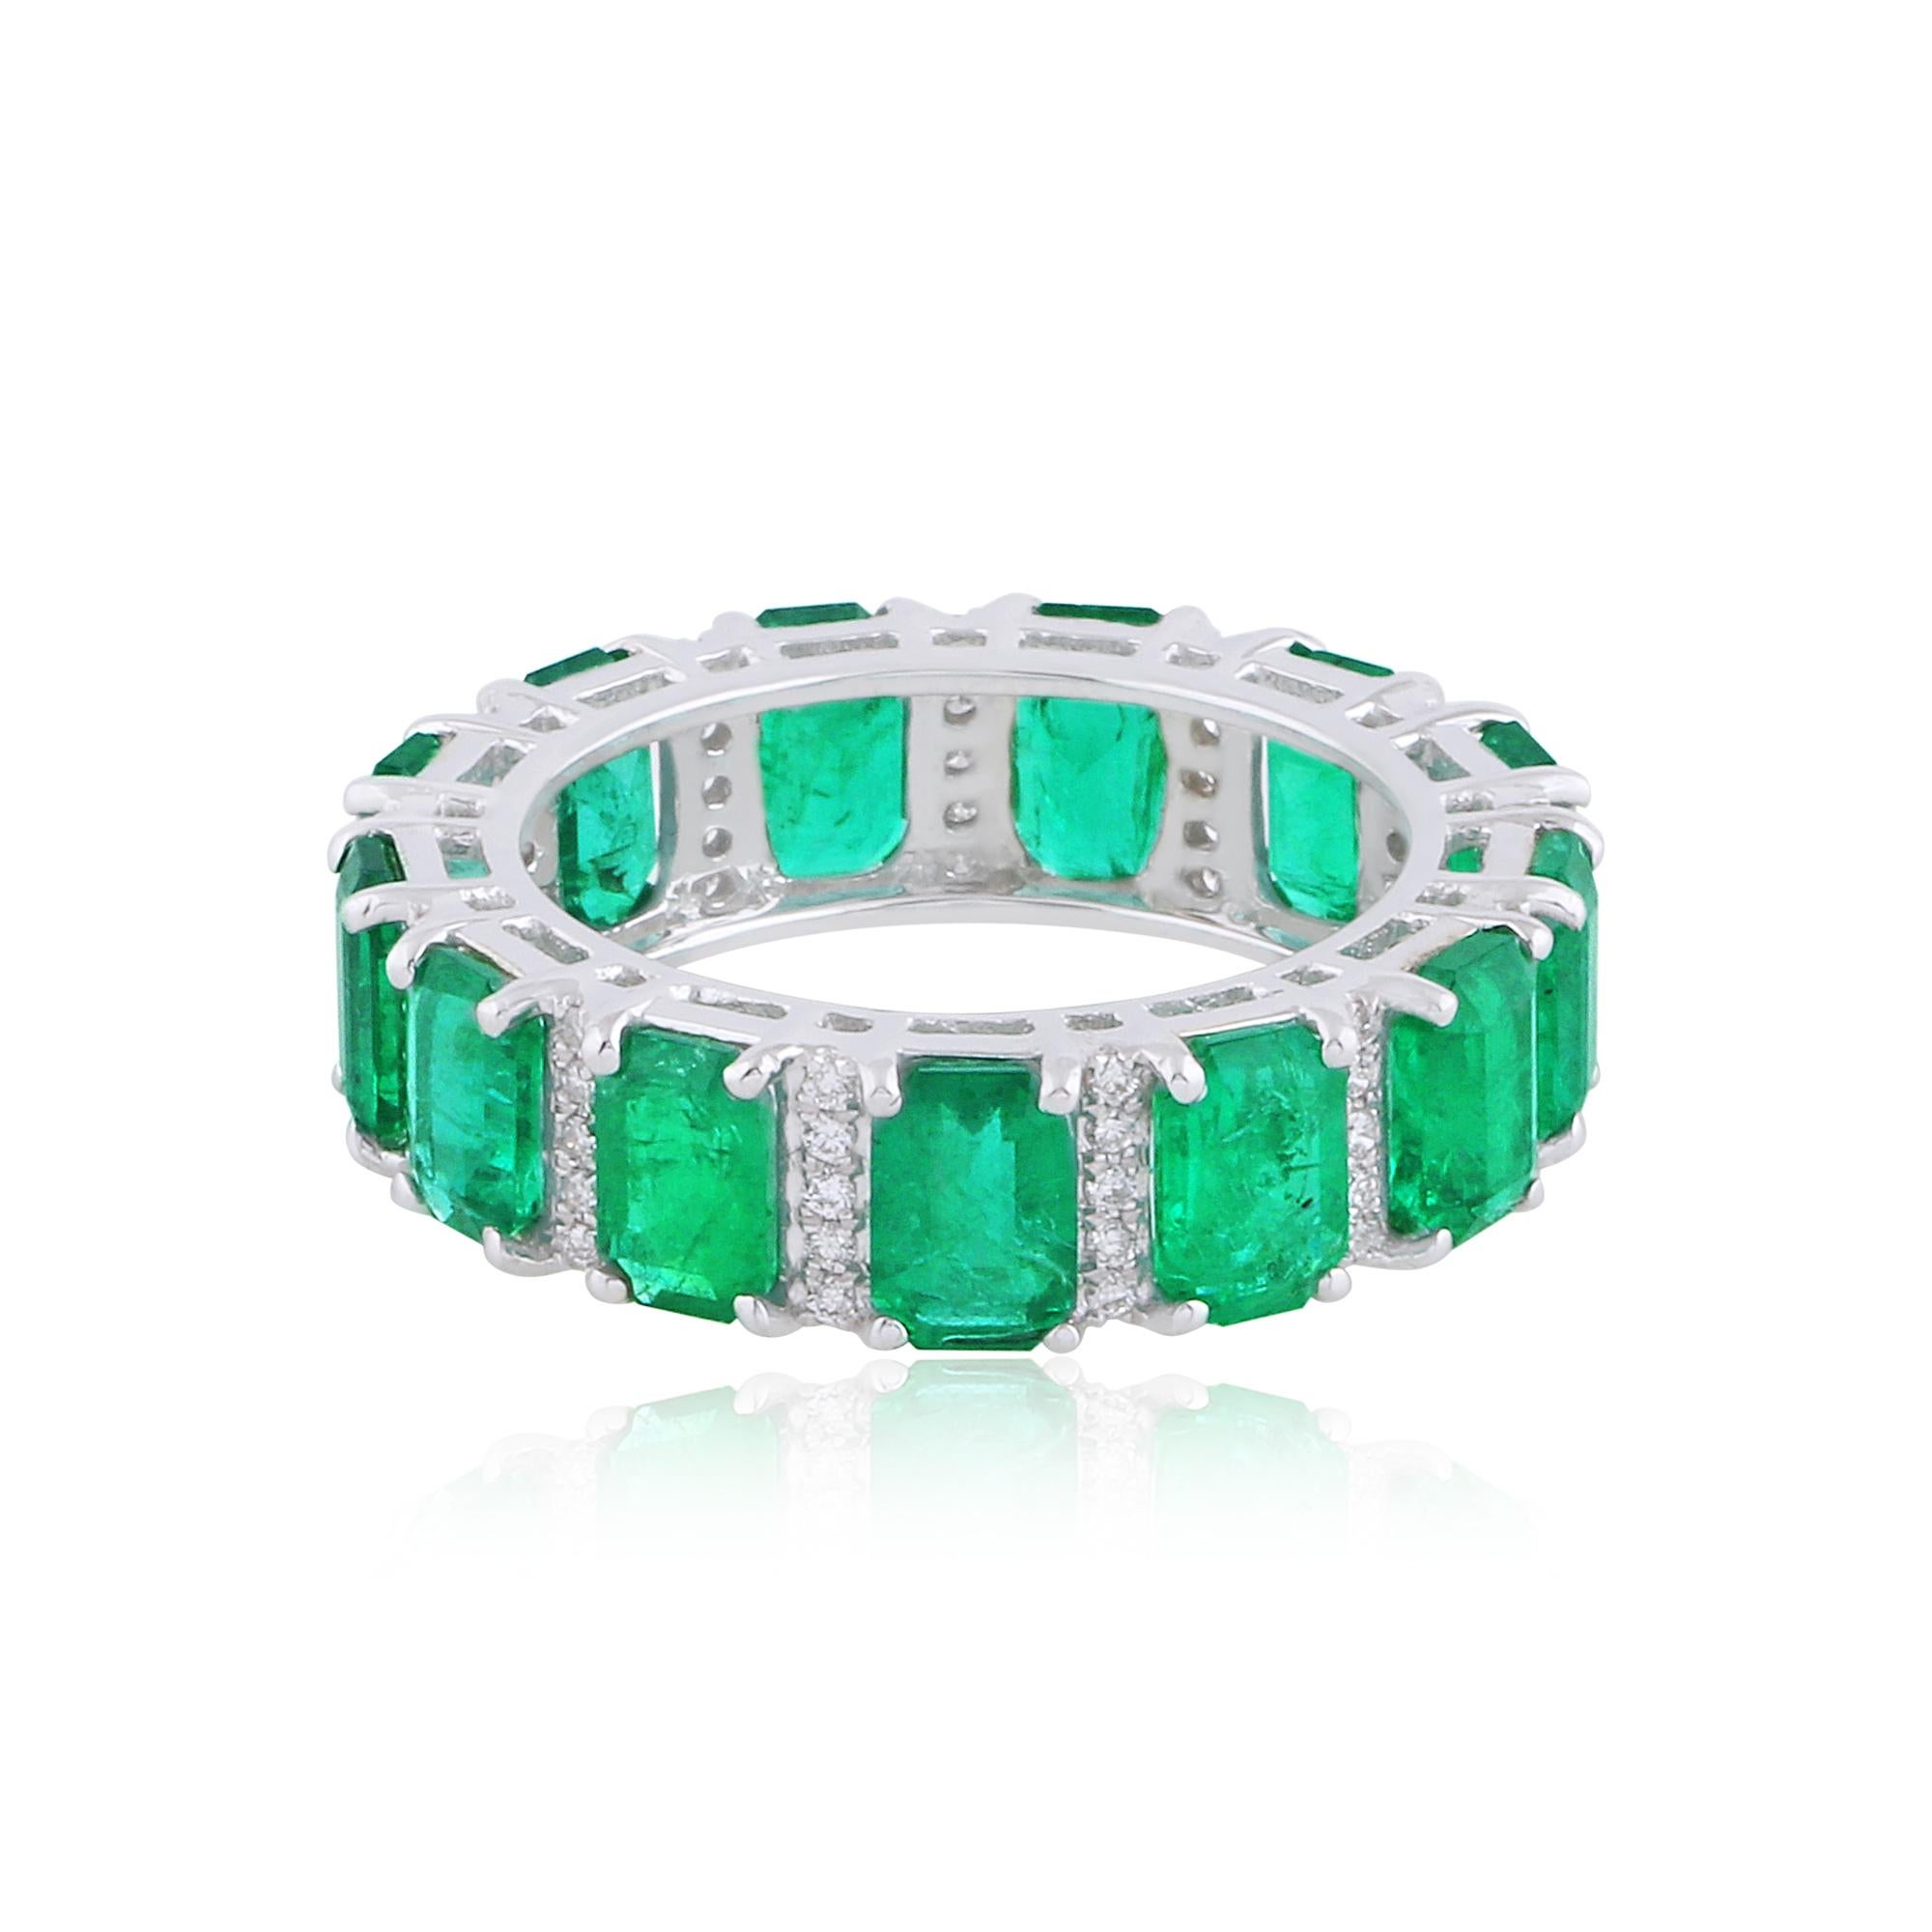 For Sale:  Natural Emerald Gemstone Band Ring SI Clarity HI Color Diamond 18k White Gold 2